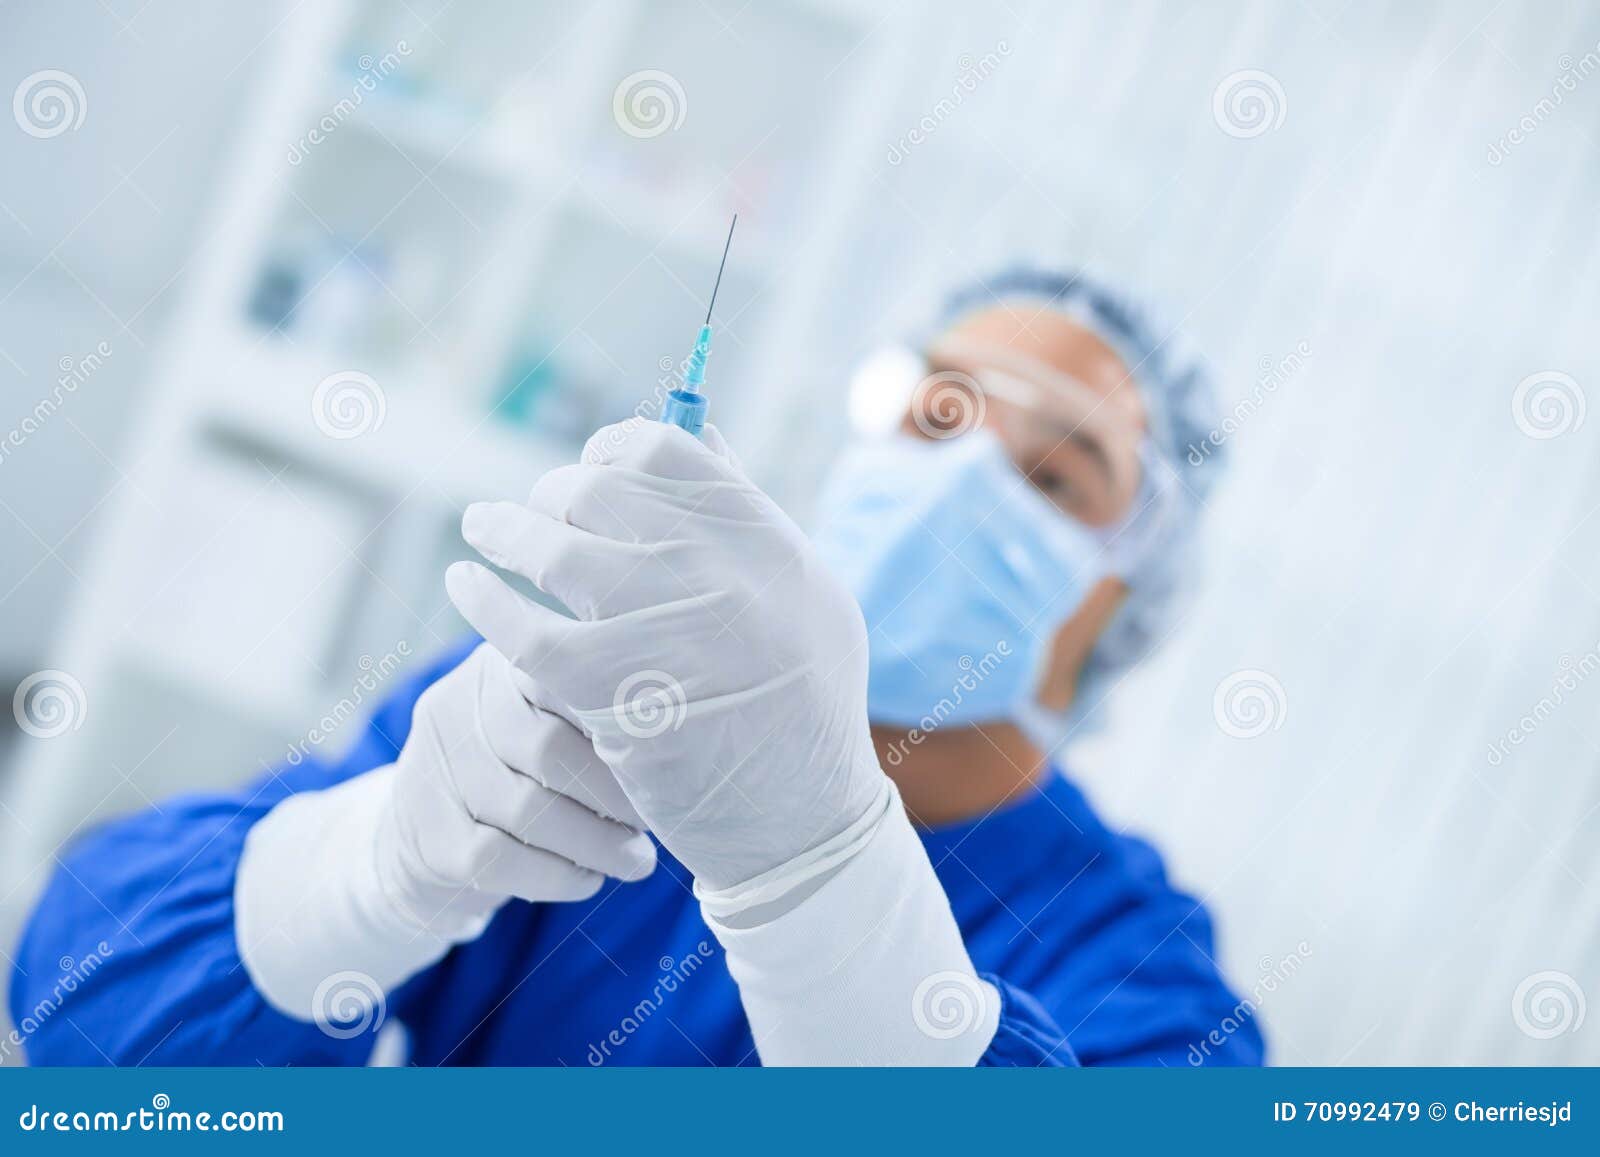 anesthesia before operation